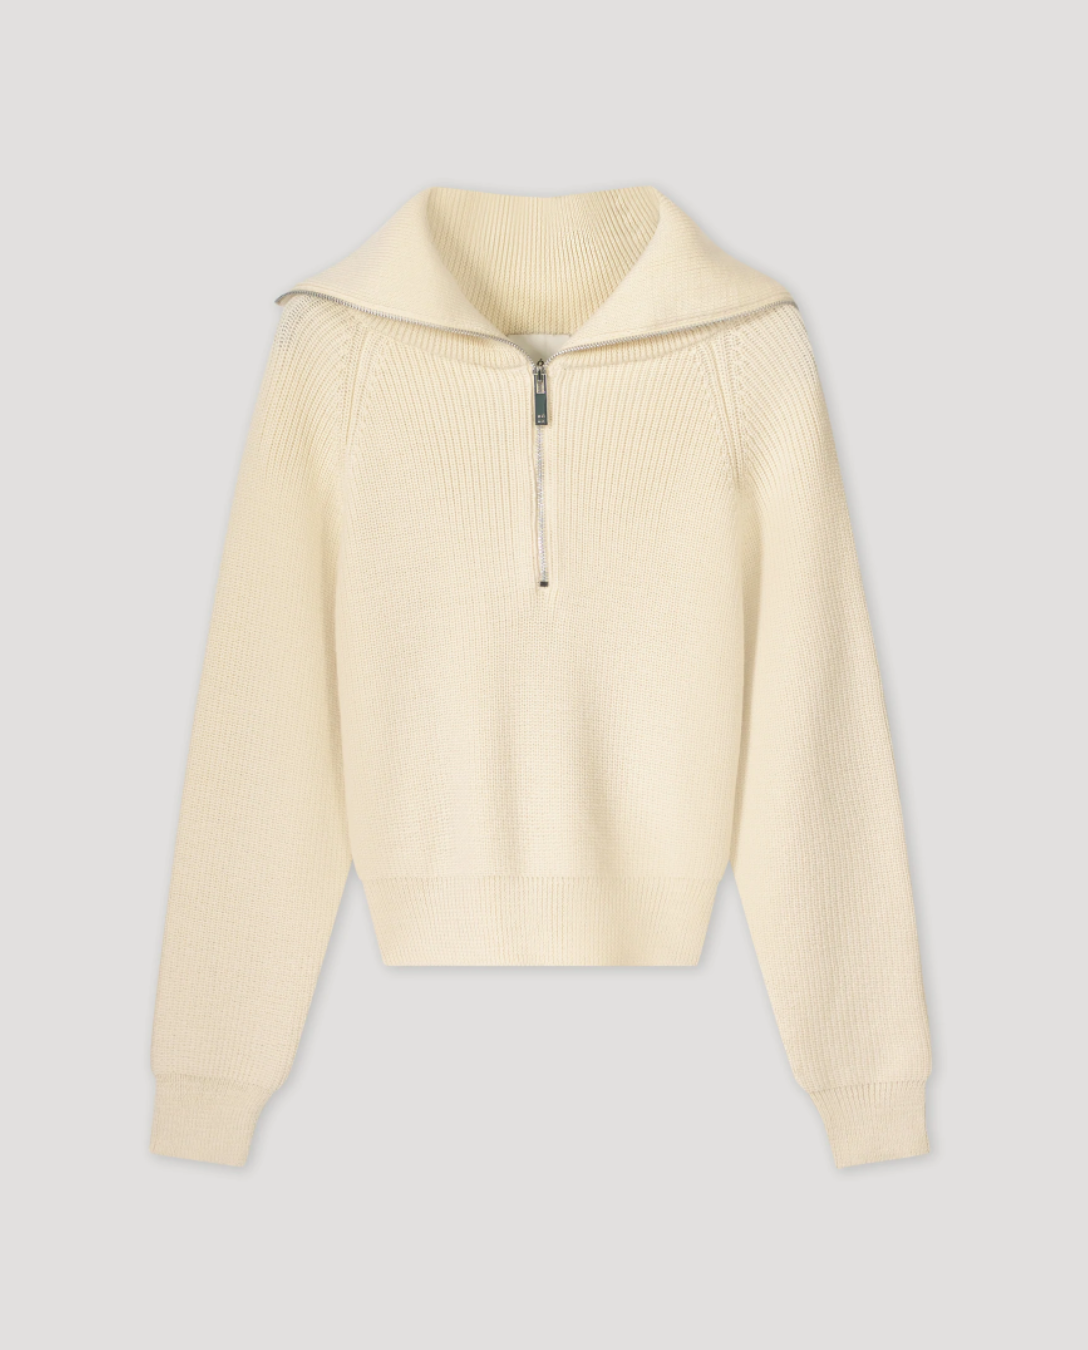 Carry Pullover in off white by Róhe Frames